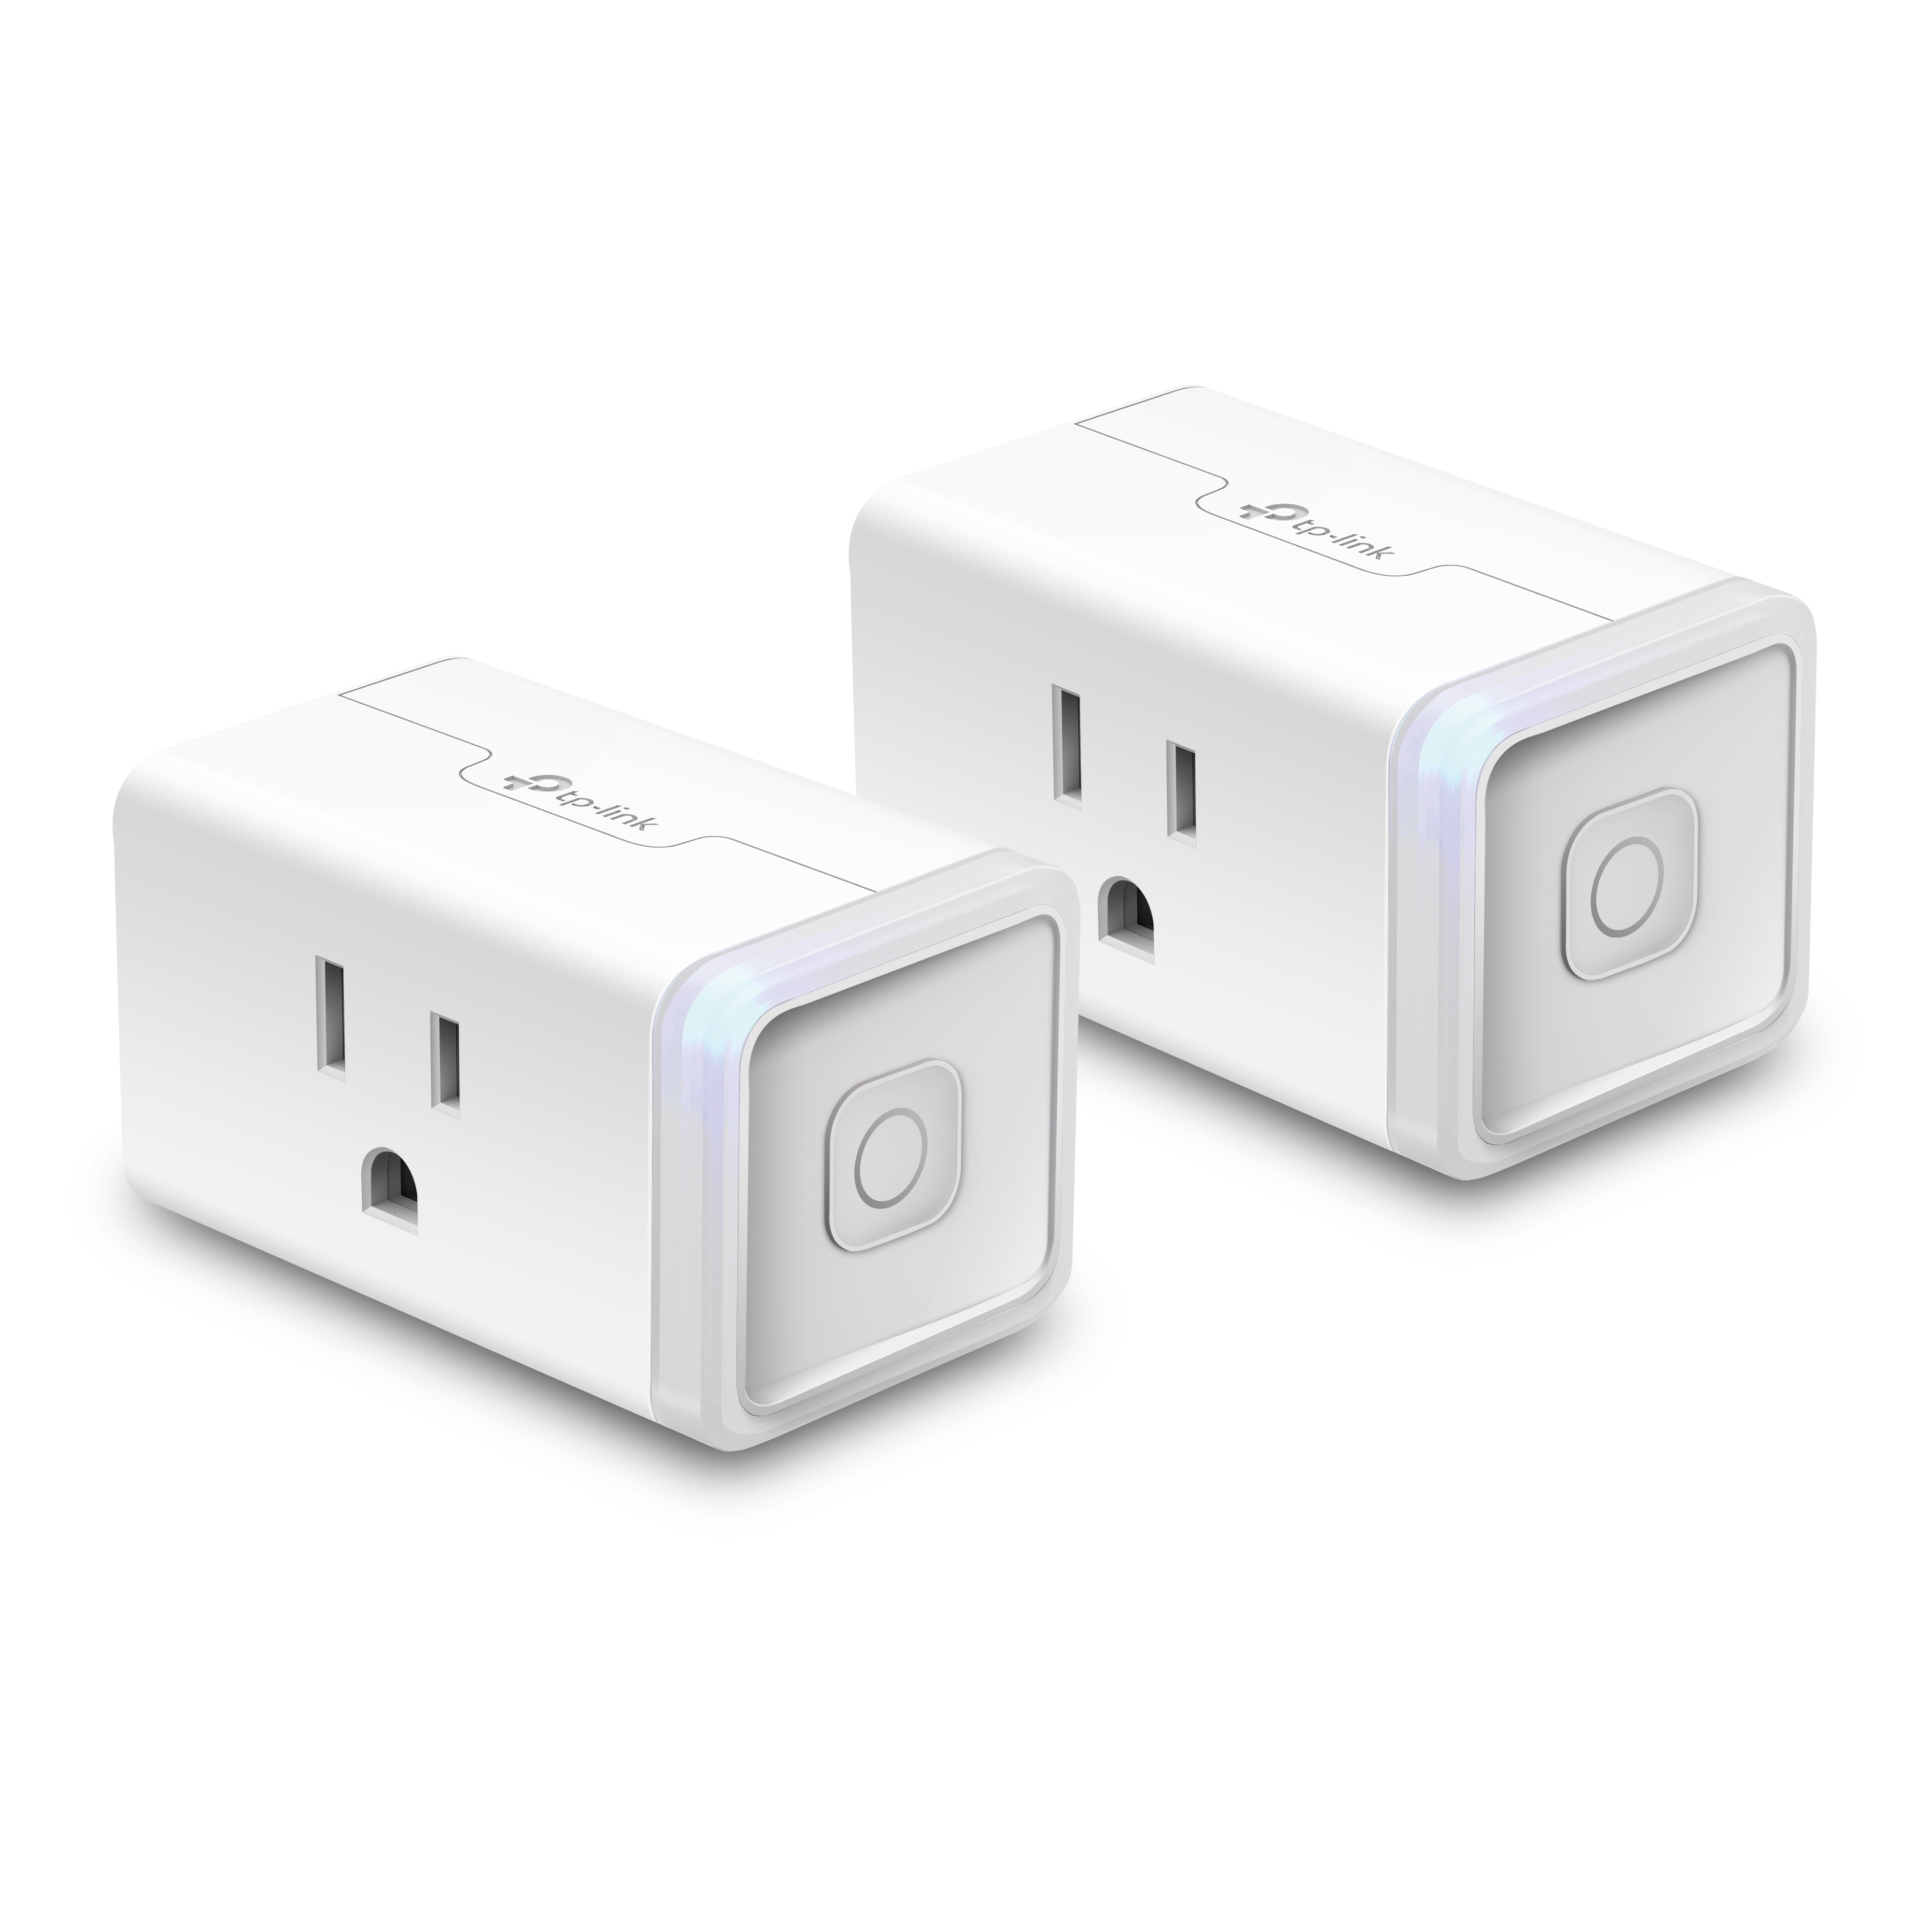 SwitchBot Plug Mini, Smart Wi-Fi and Bluetooth Outlet, 15A, 4 Pack 